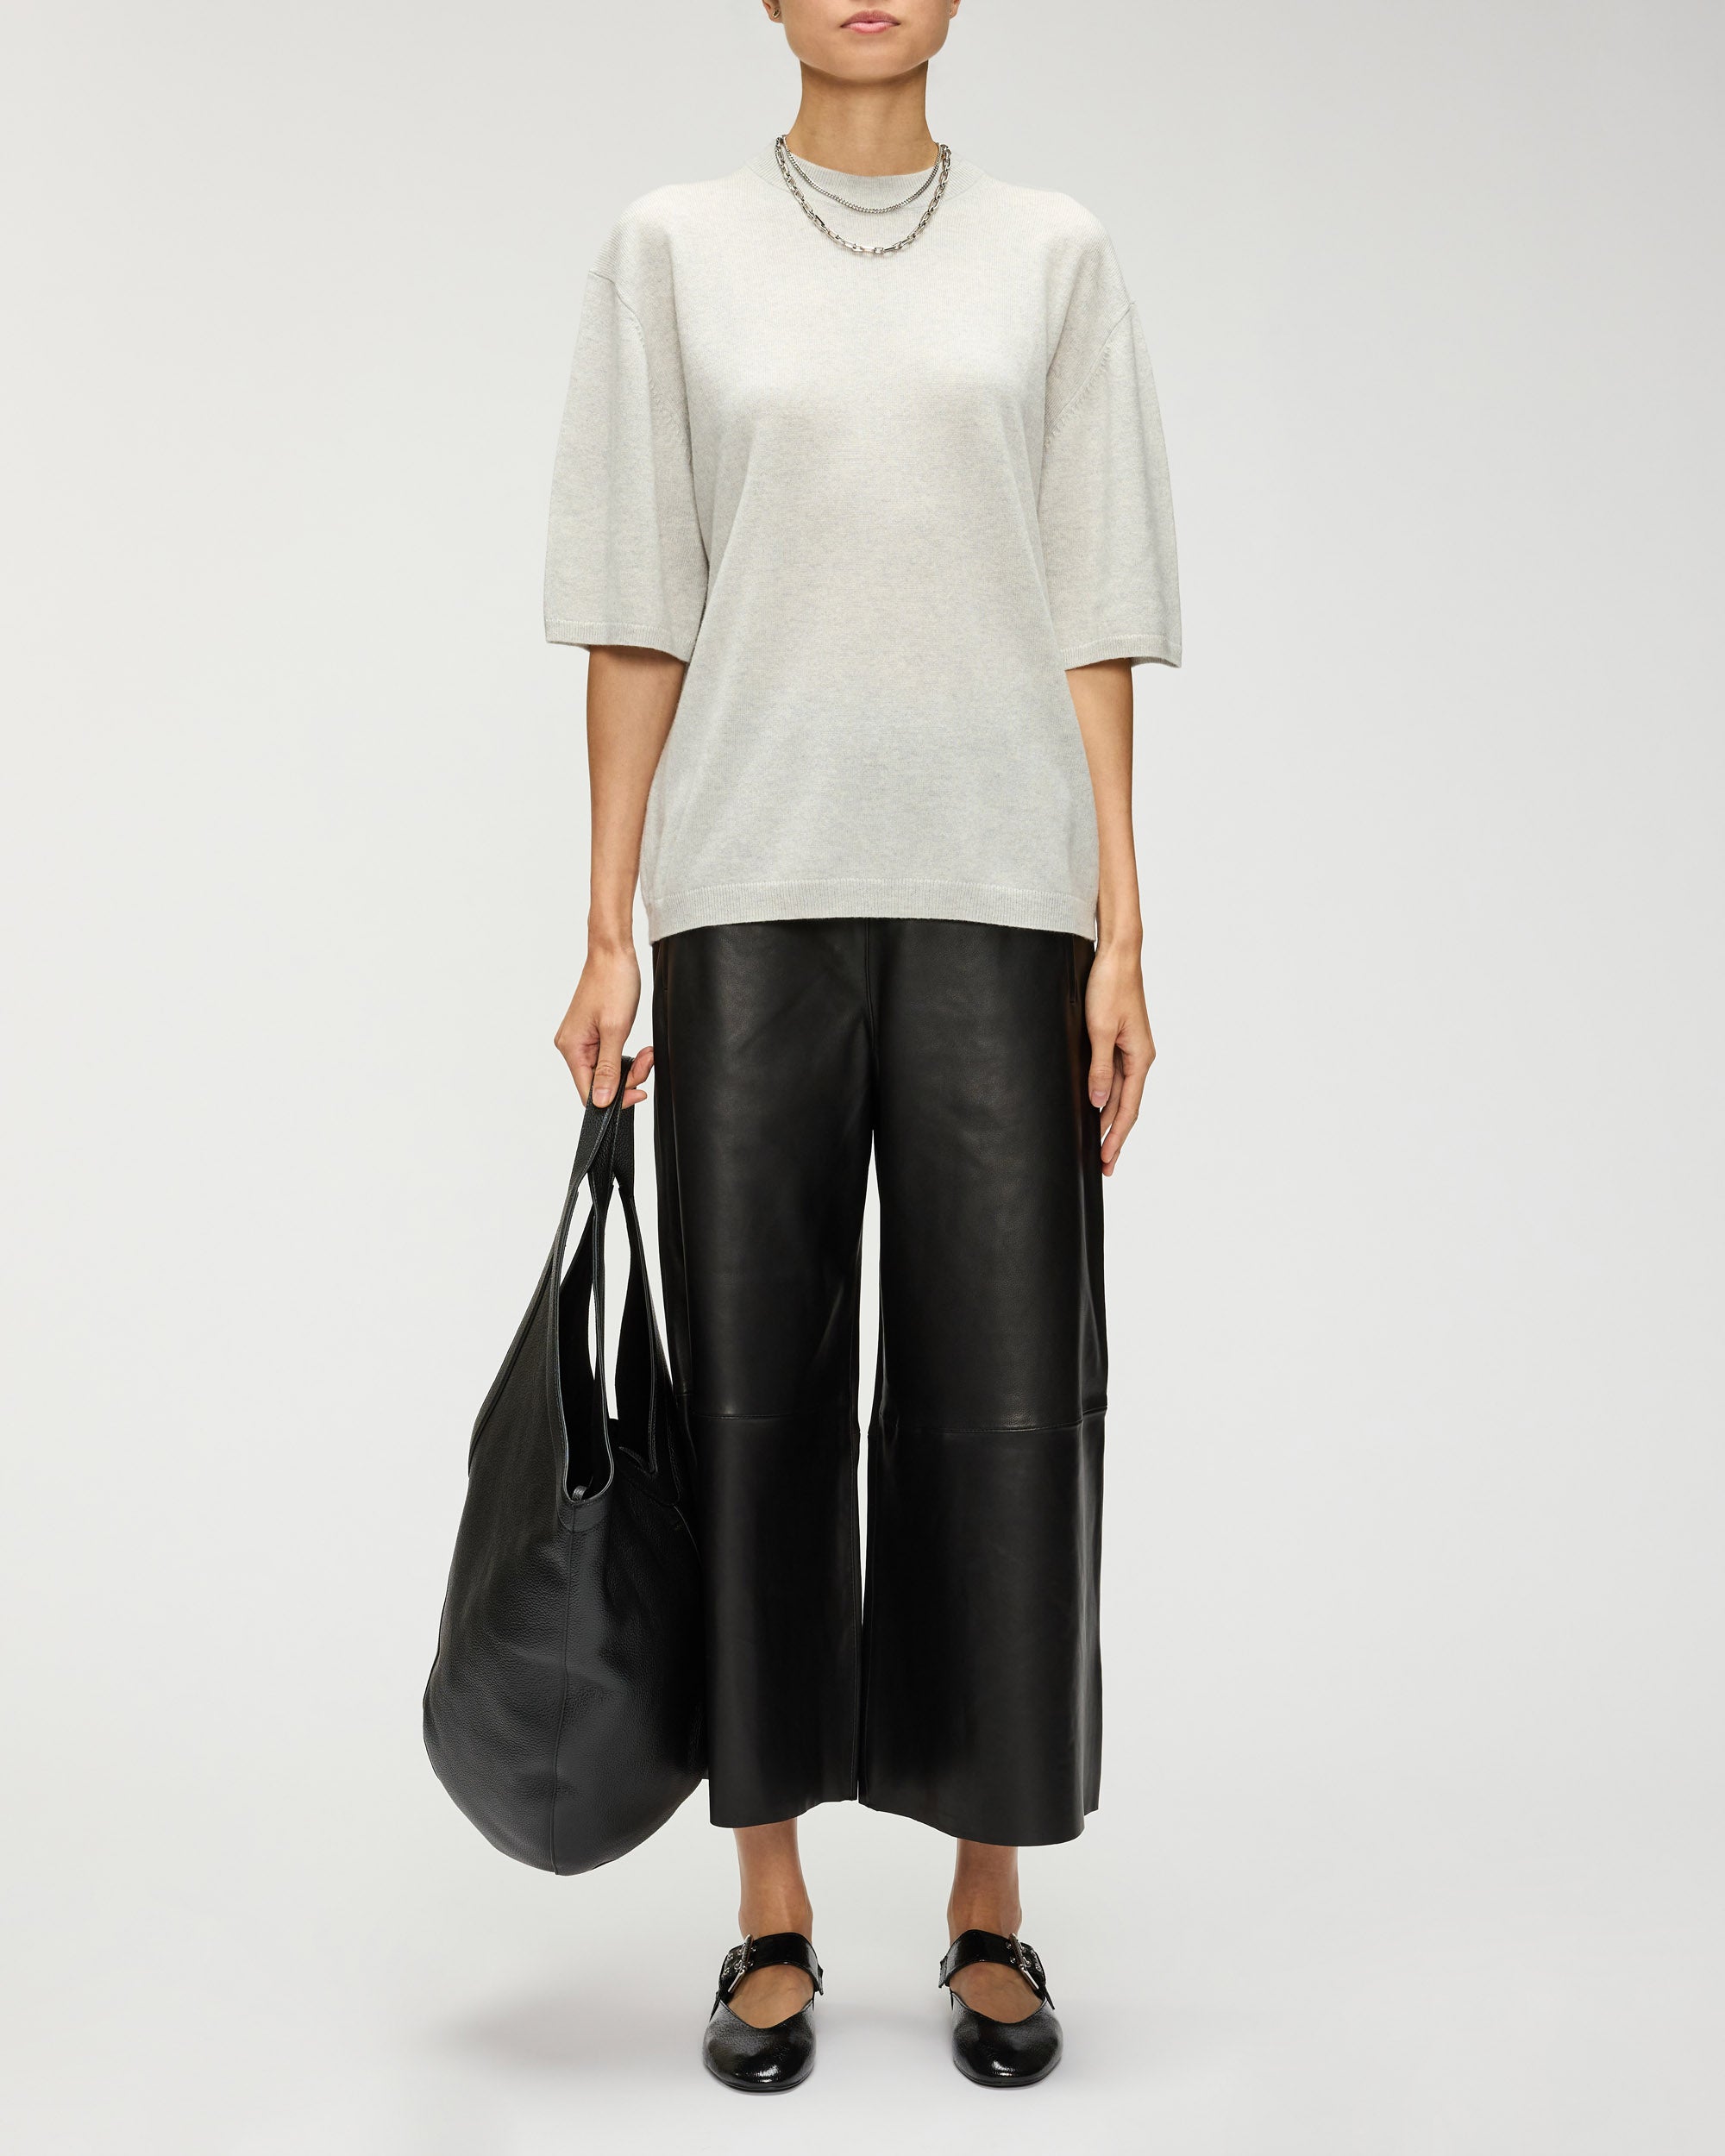 TIBI Washable Cashmere Oversized Easy T in Light Heather Grey– Capsule Shop